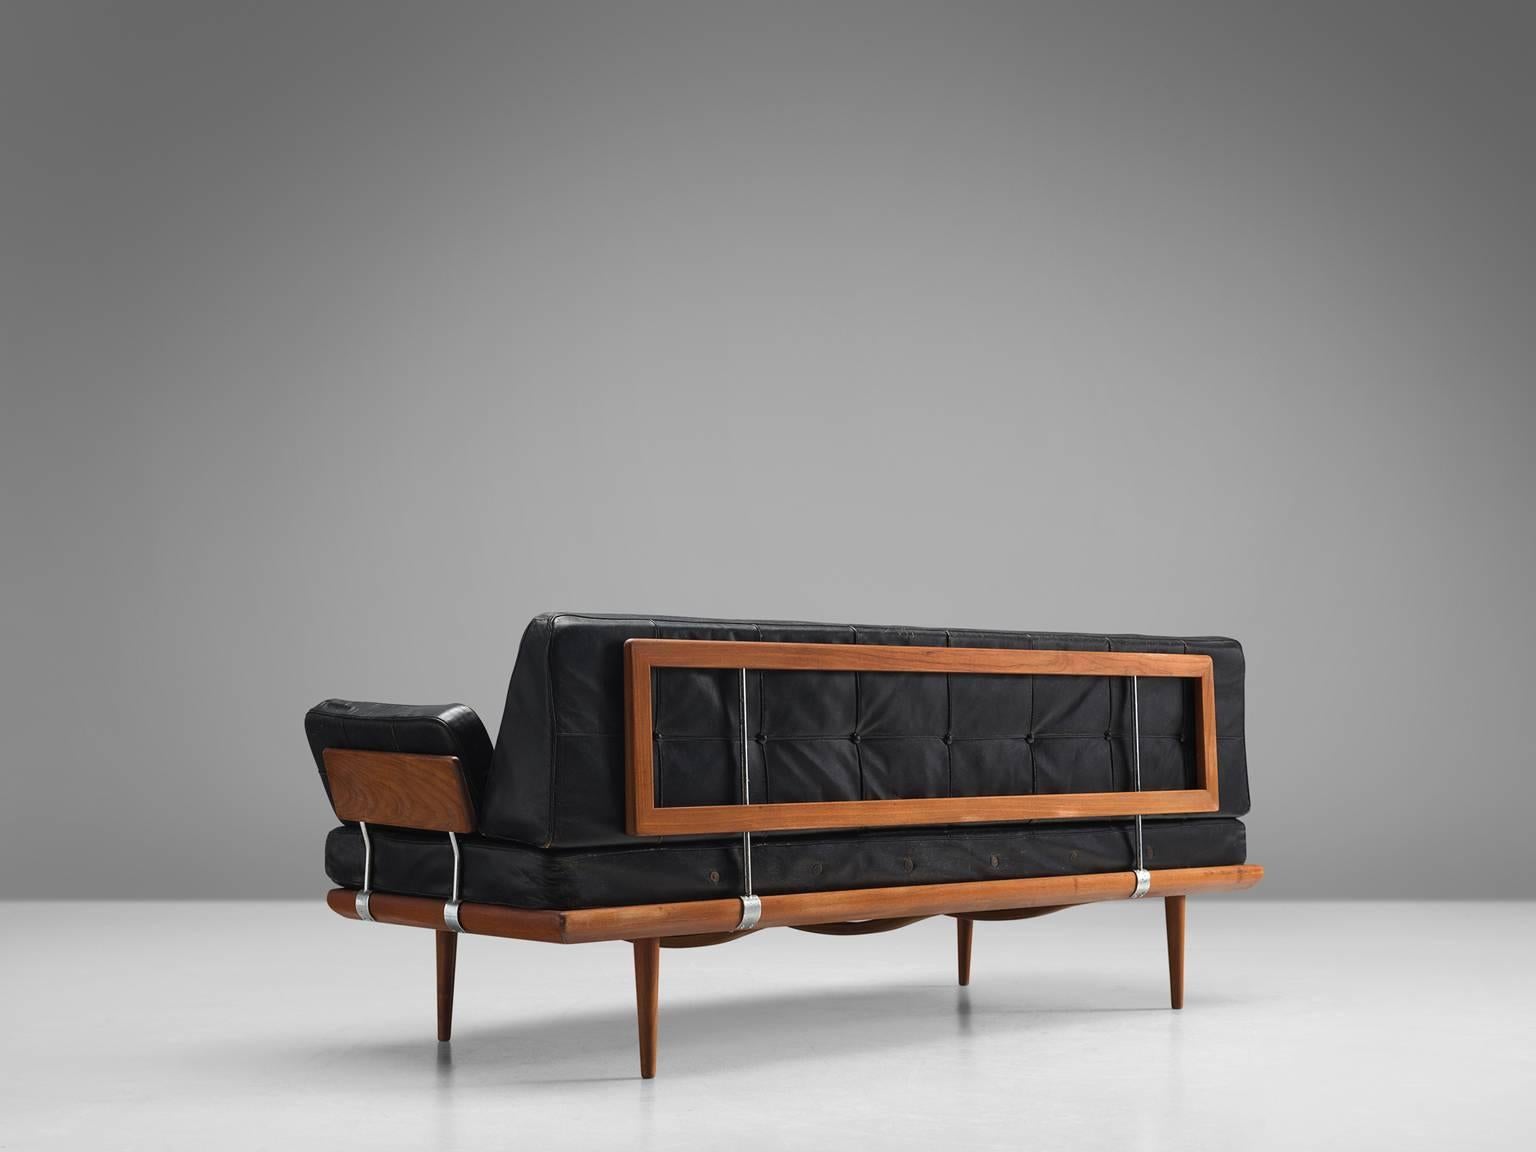 Peter Hvidt and Orla Mølgaard-Nielsen for France & Søn, 'Minerva' daybed, teak, metal, leather, Denmark, design 1957, production 1960s.

This sofa and daybed 'Minerva', named after the goddess of wisdom, is a true midcentury Classic by the design